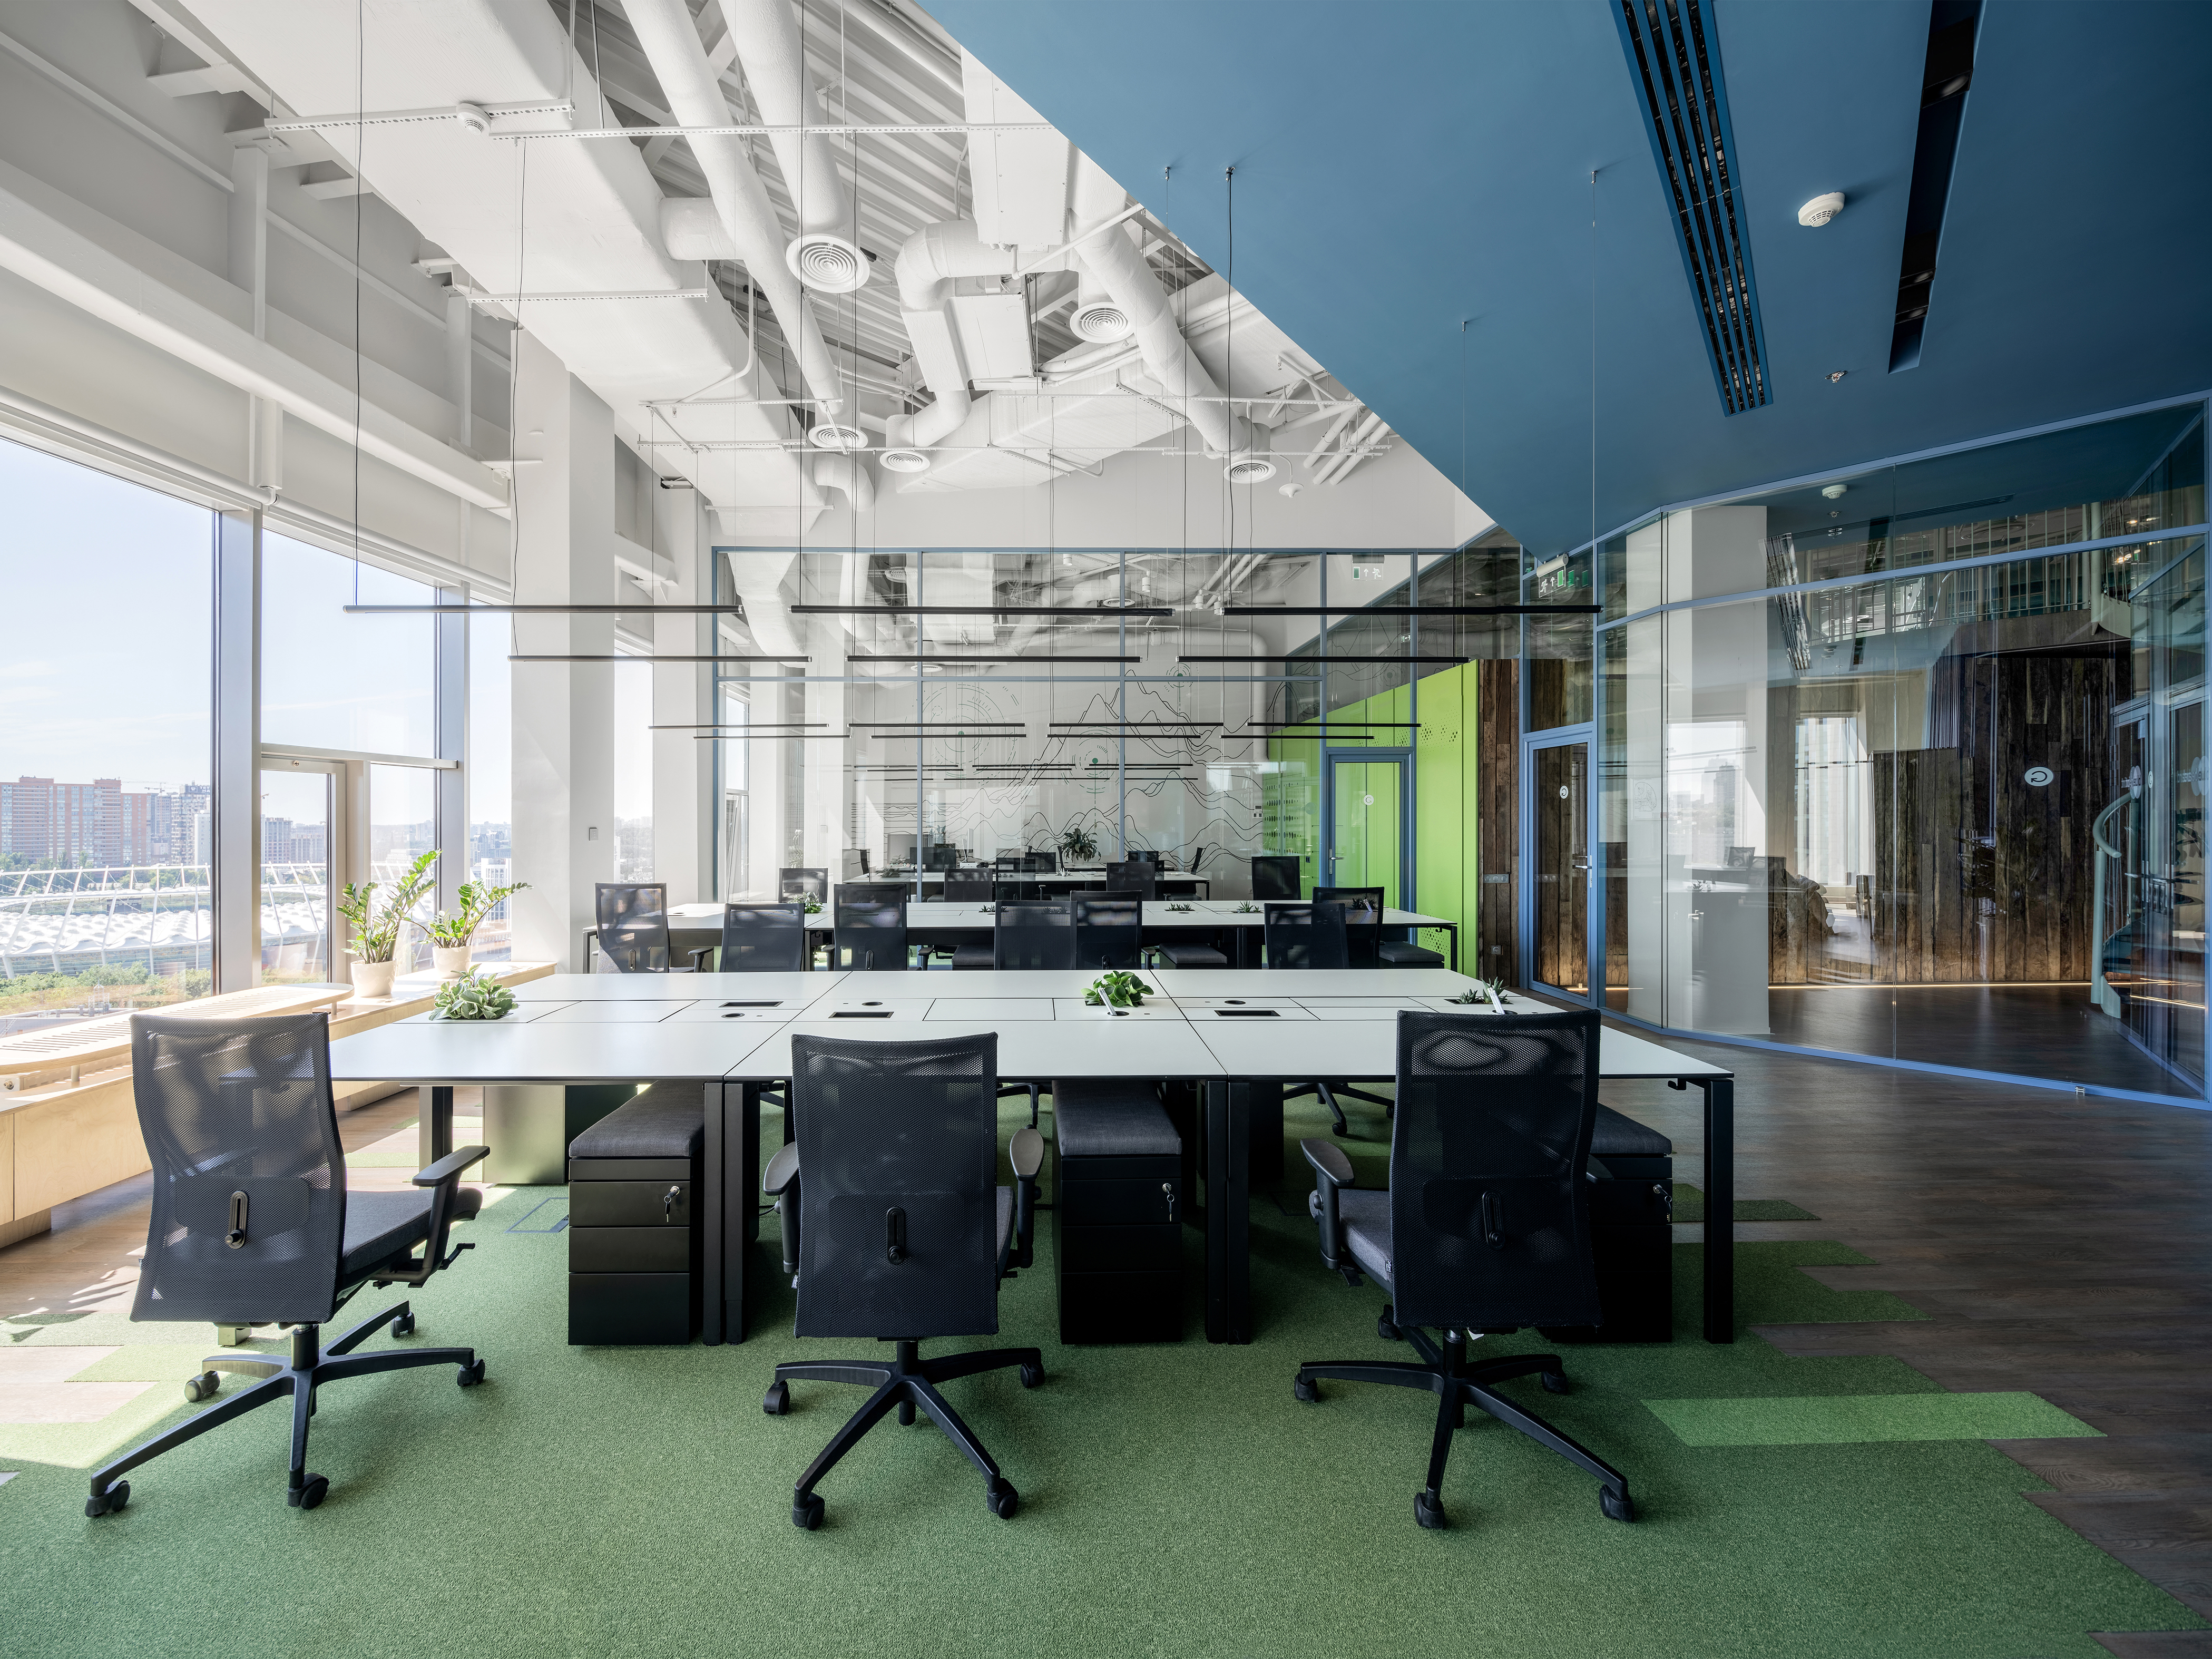 From furniture and fixtures to tech-savvy workspaces